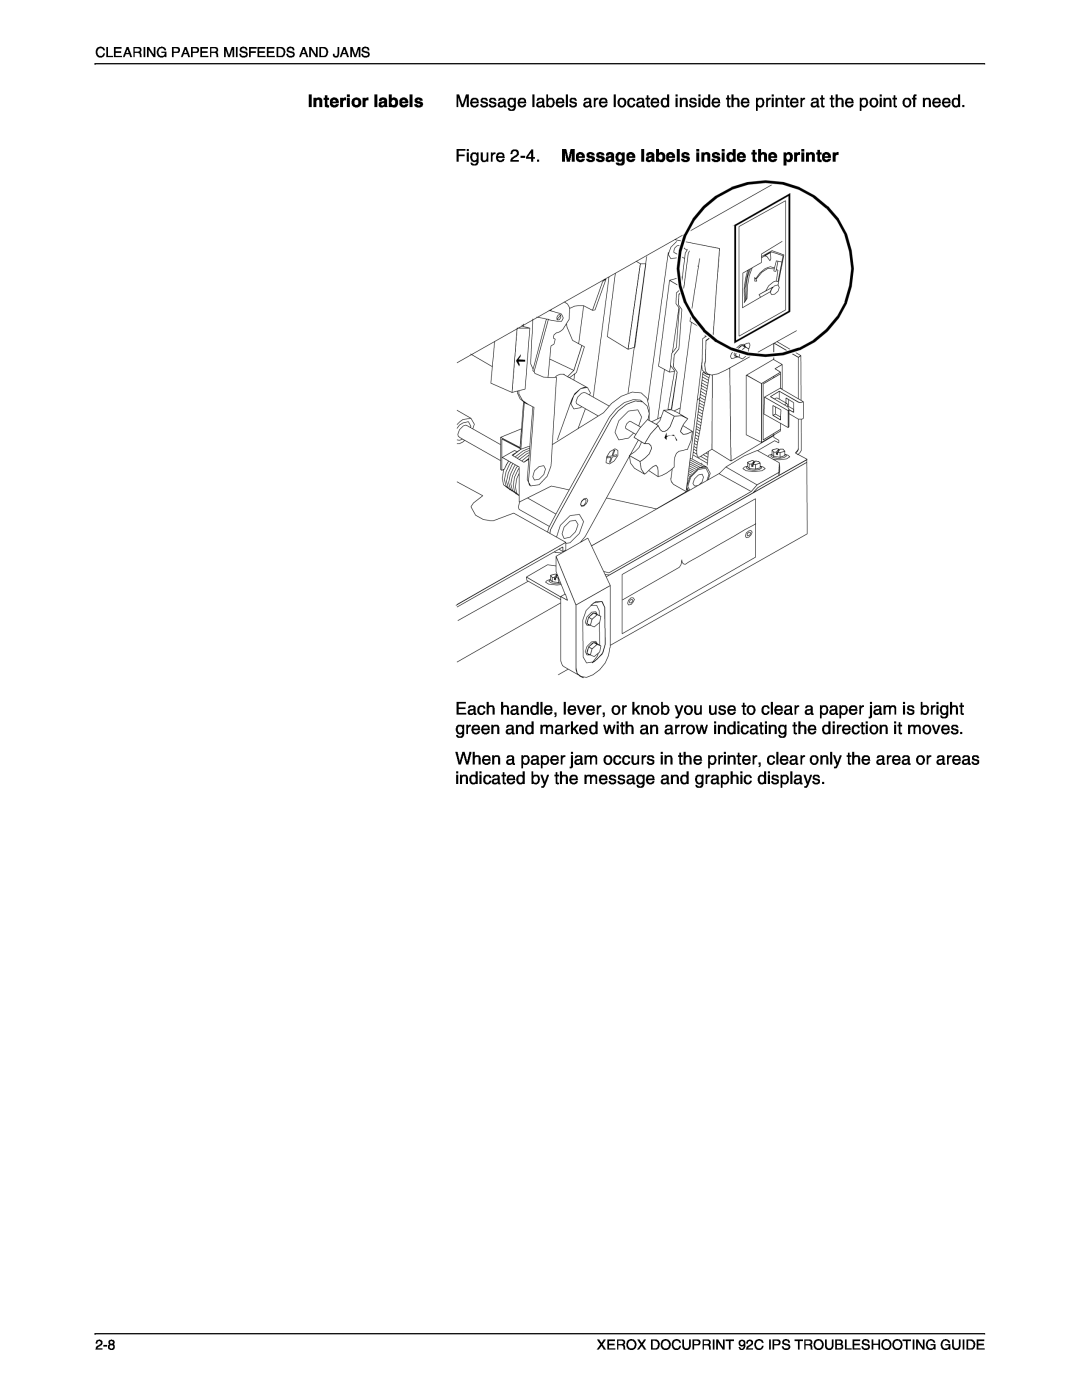 Xerox 92C IPS manual 4. Message labels inside the printer 